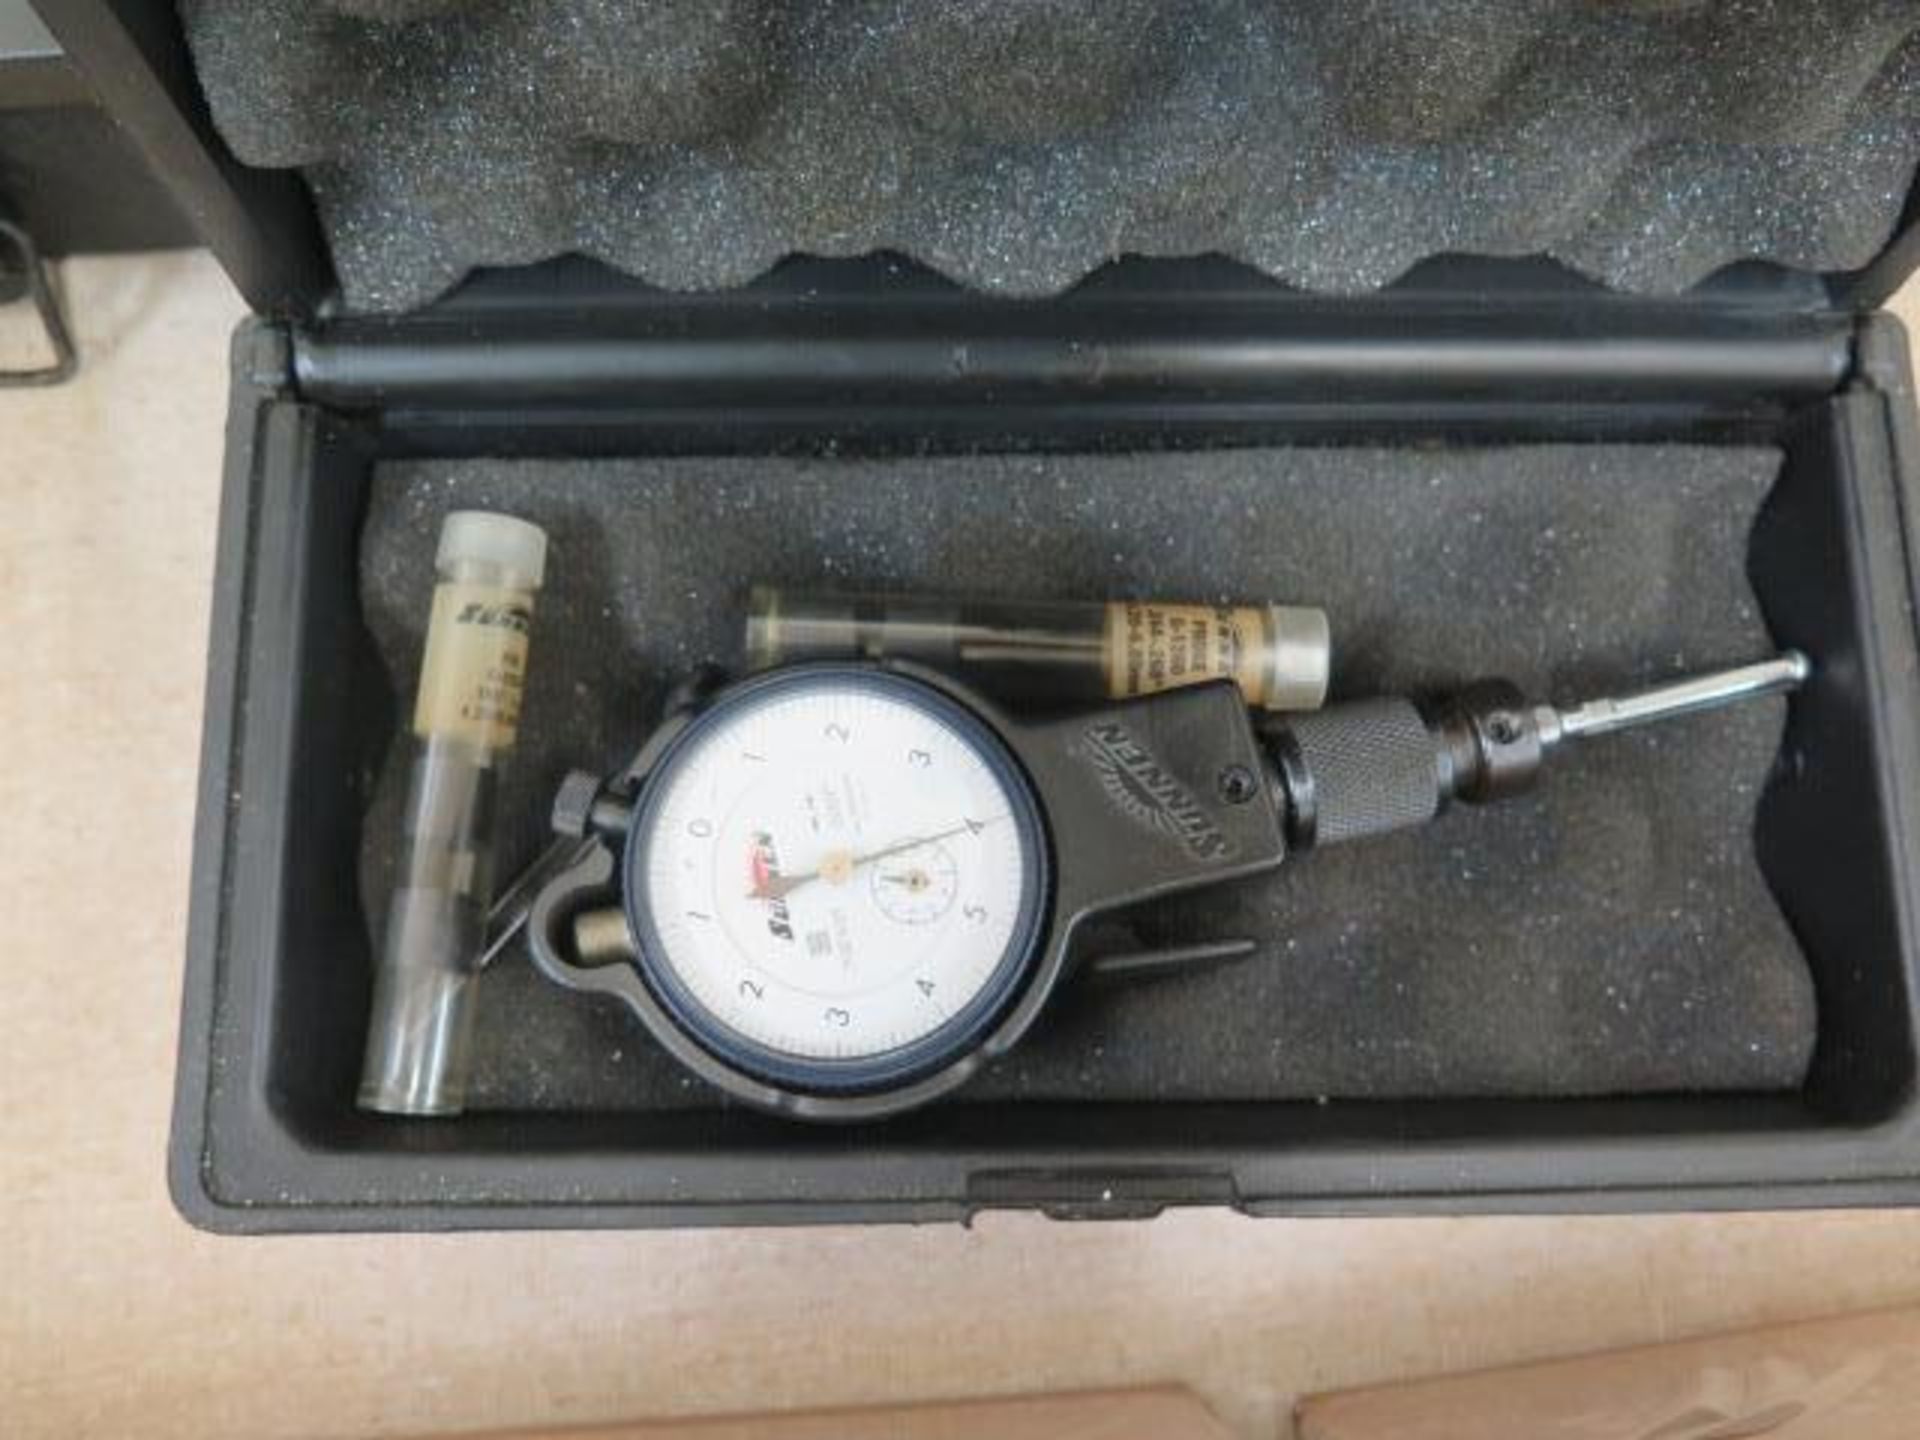 Sunnen 2"-8" Dial Bore gage and Small Bore Dial Bore Gage (SOLD AS-IS - NO WARRANTY) - Image 2 of 6